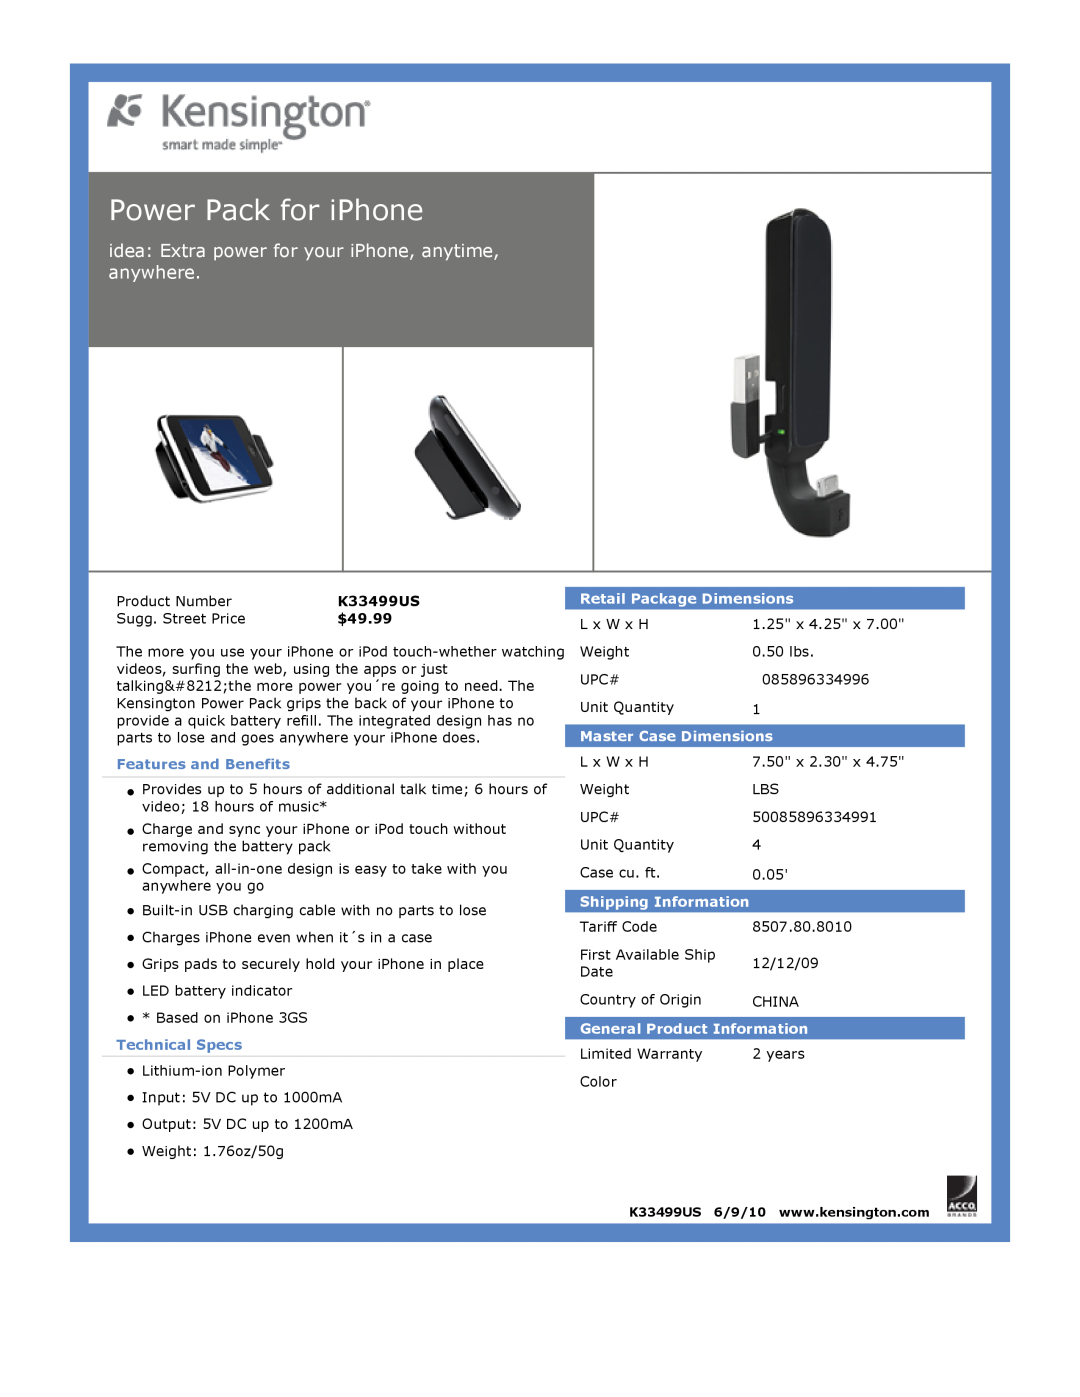 Kensington EU64325 Power Pack for iPhone, $49.99, Features and Benefits, Technical Specs, Retail Package Dimensions 